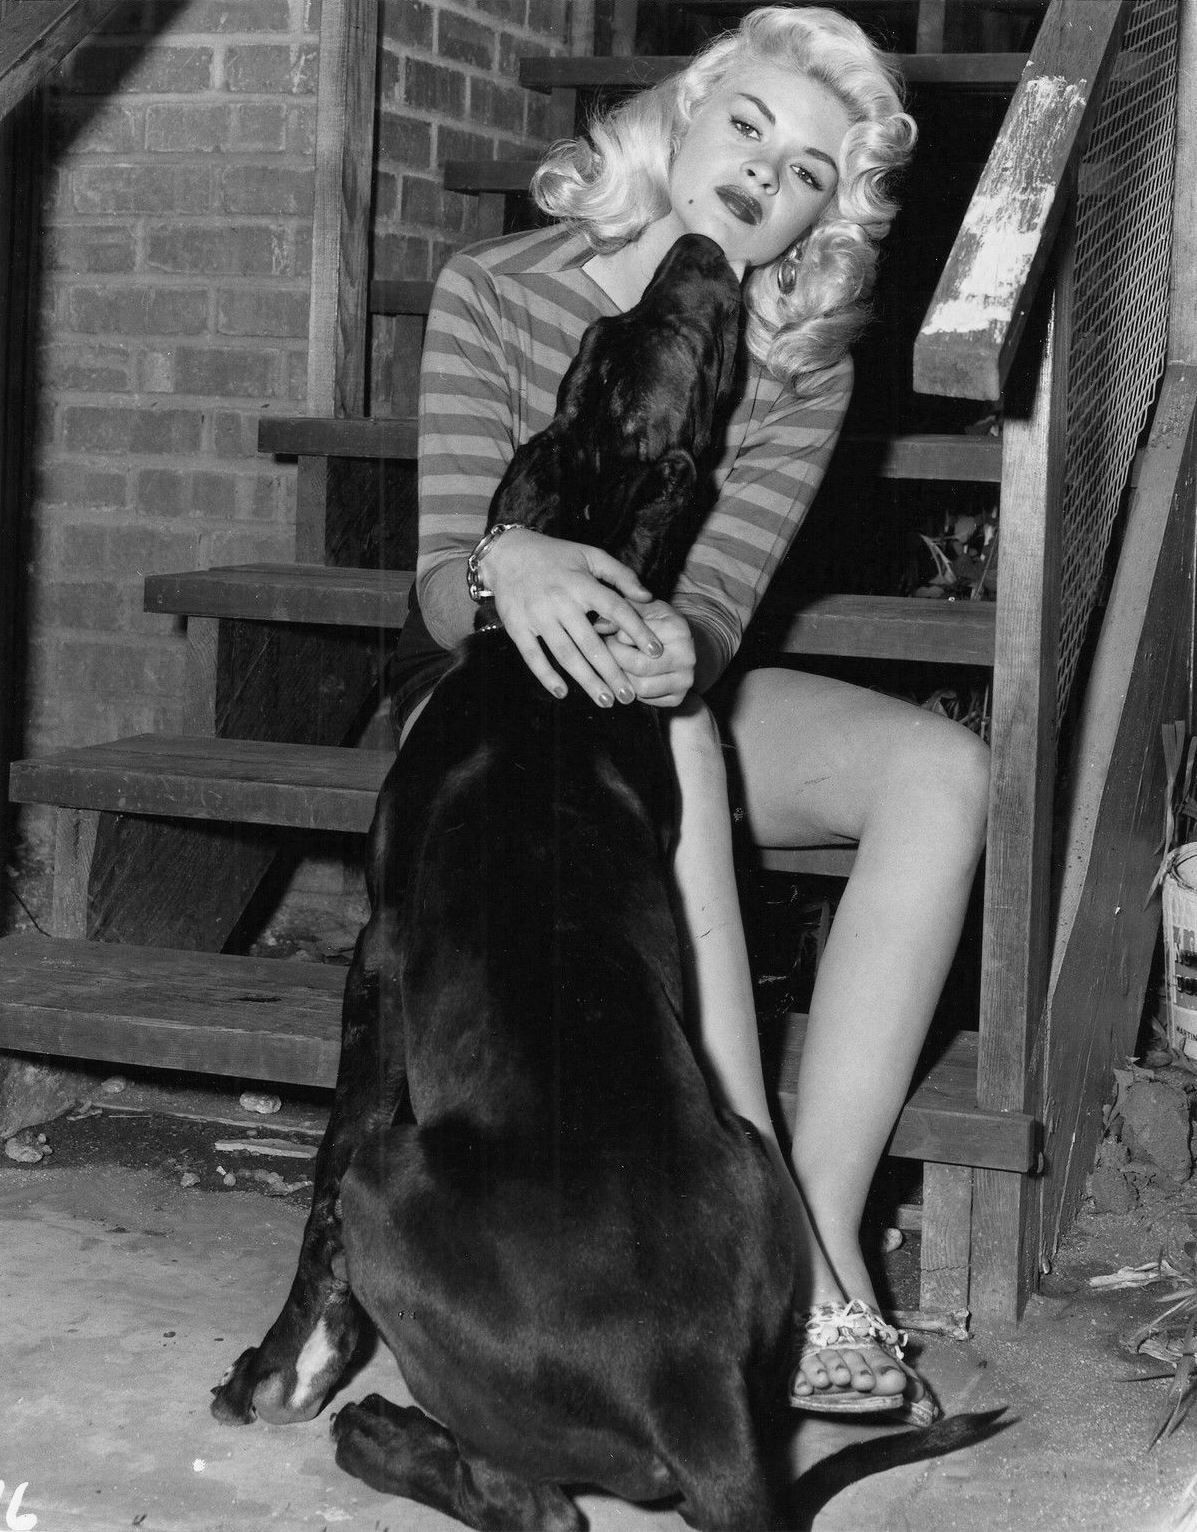 black and white photo of Jayne Mansfield sitting on the stairs while putting her hands around a Great Dane Dog sitting in front of her